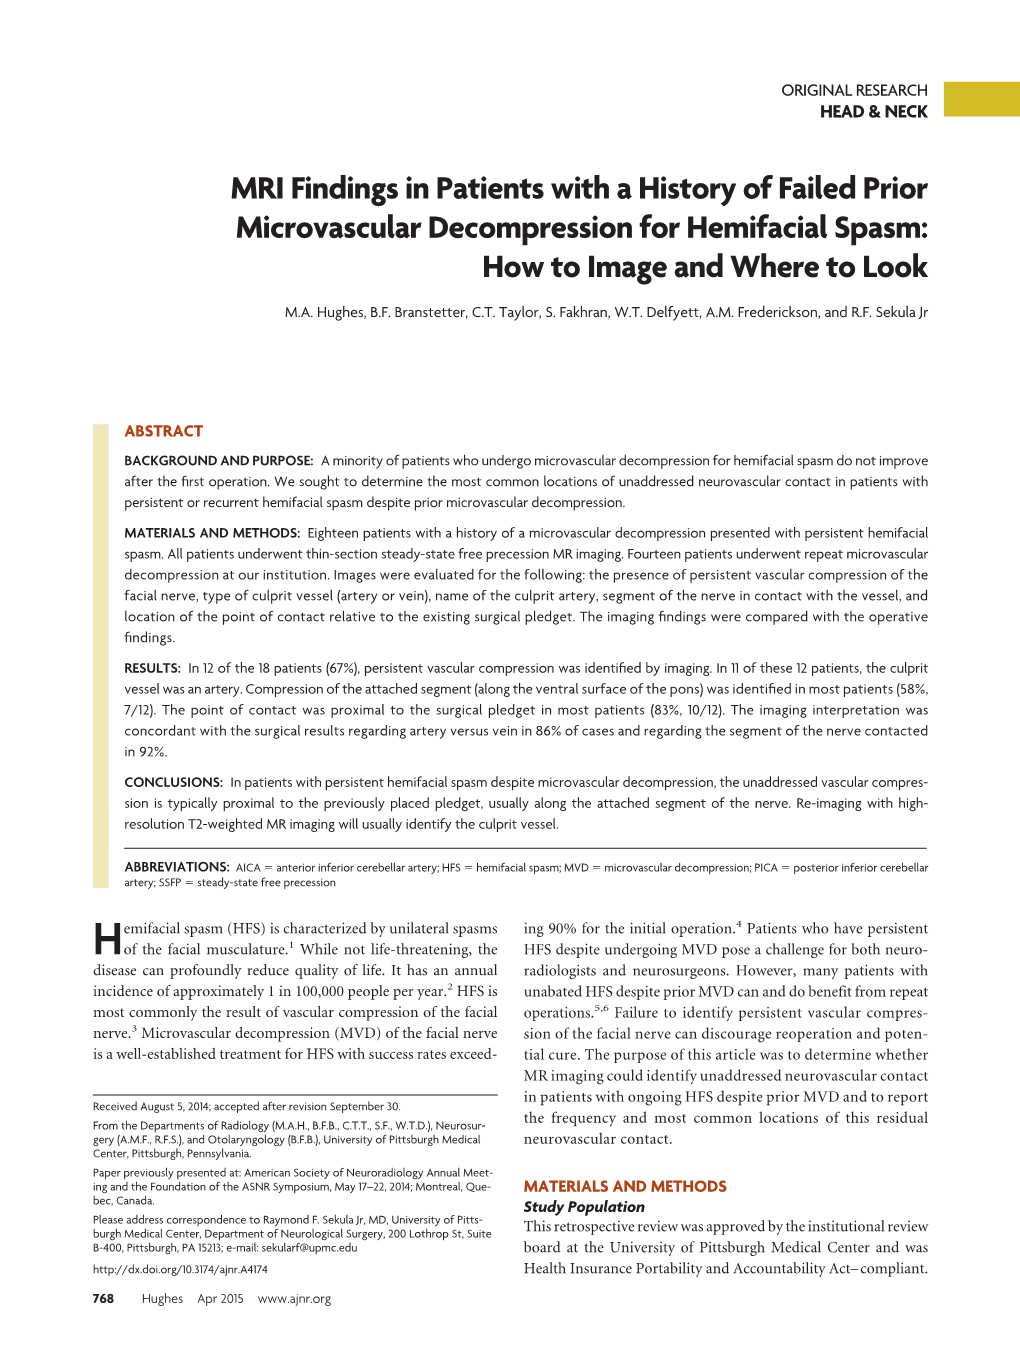 MRI Findings in Patients with a History of Failed Prior Microvascular Decompression for Hemifacial Spasm: How to Image and Where to Look